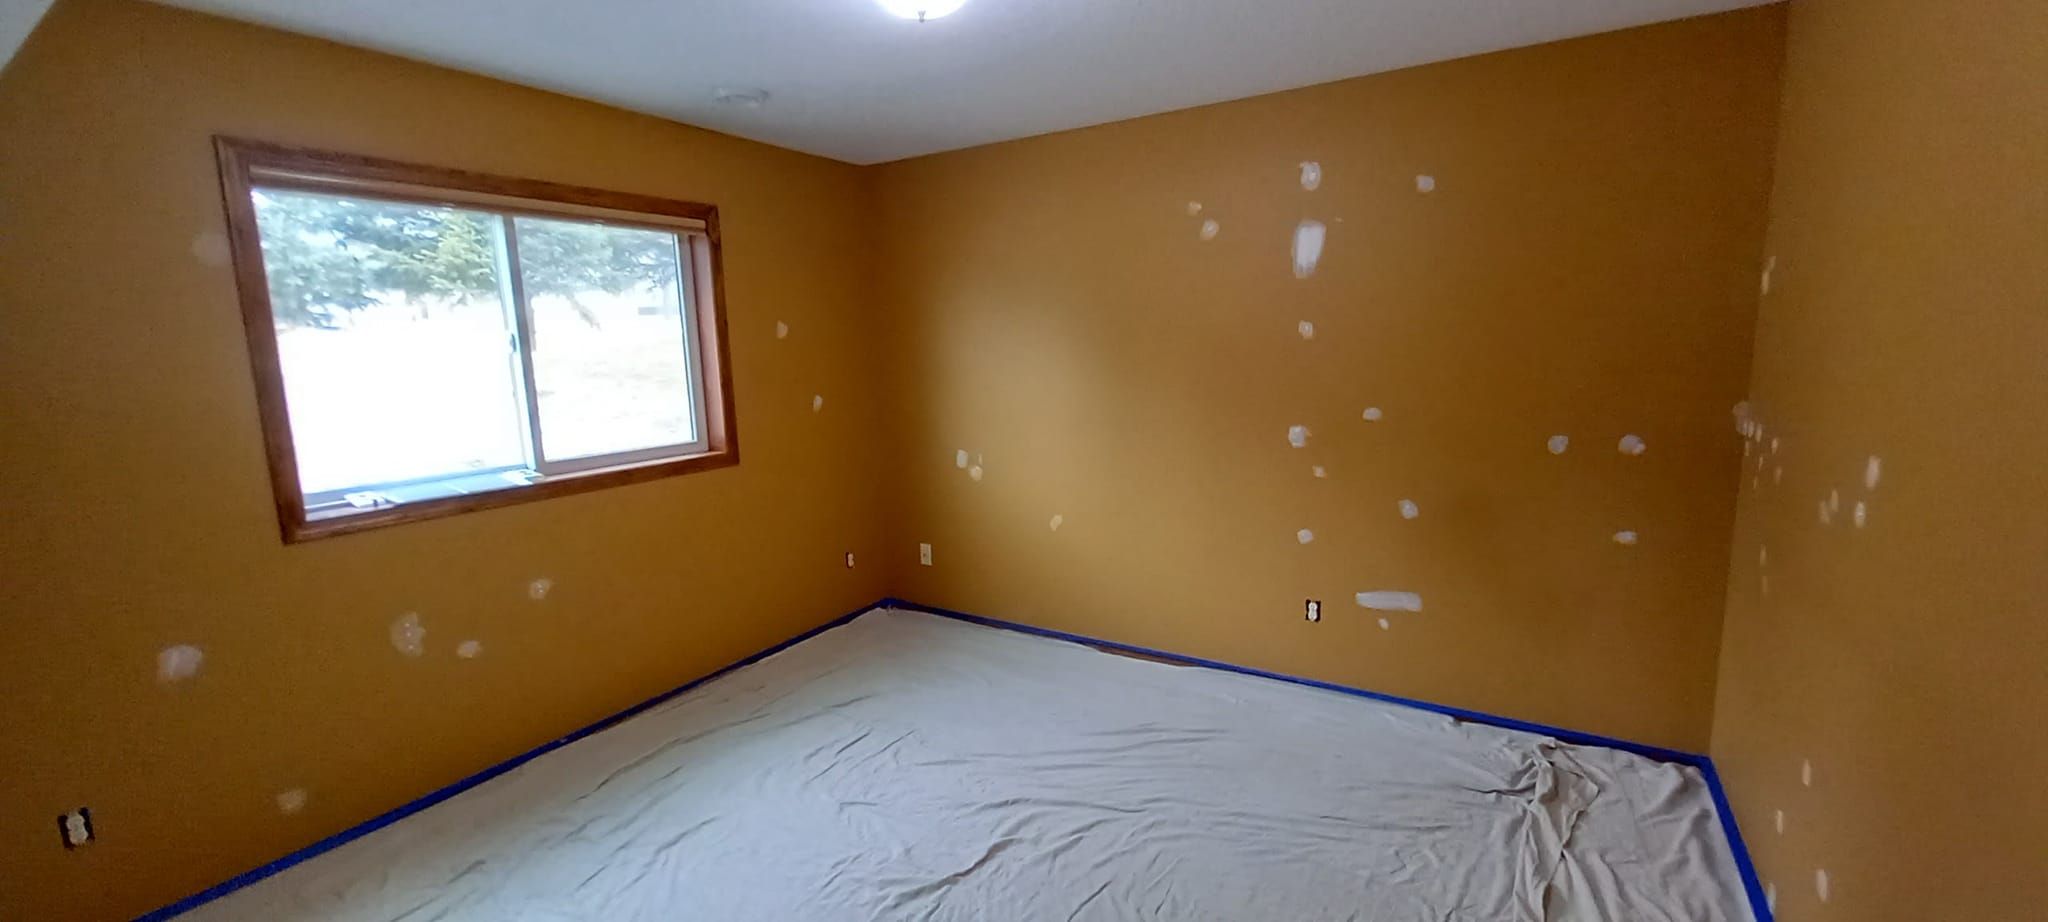 All Photos for M&M's Painting and Drywall in Red Wing, Minnesotta